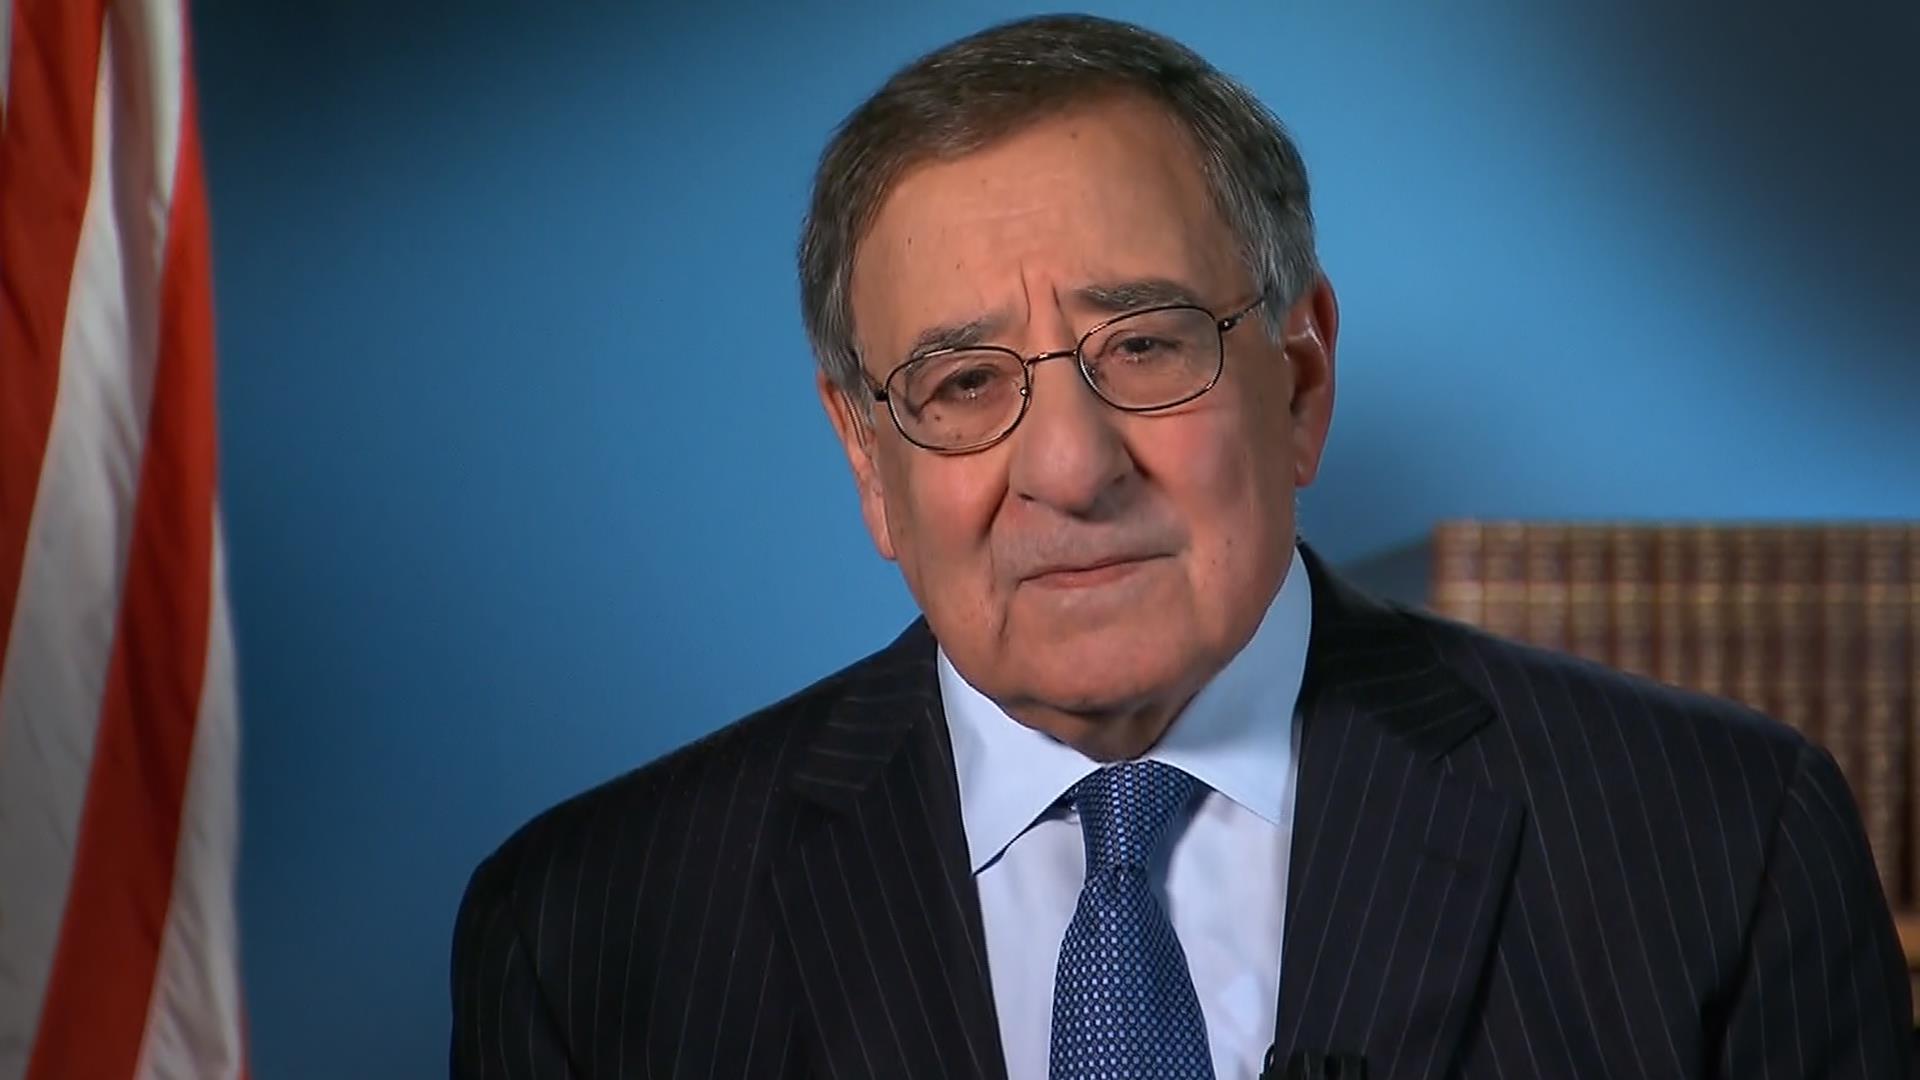 Panetta: Withholding Intelligence Would be a Fireable Offense